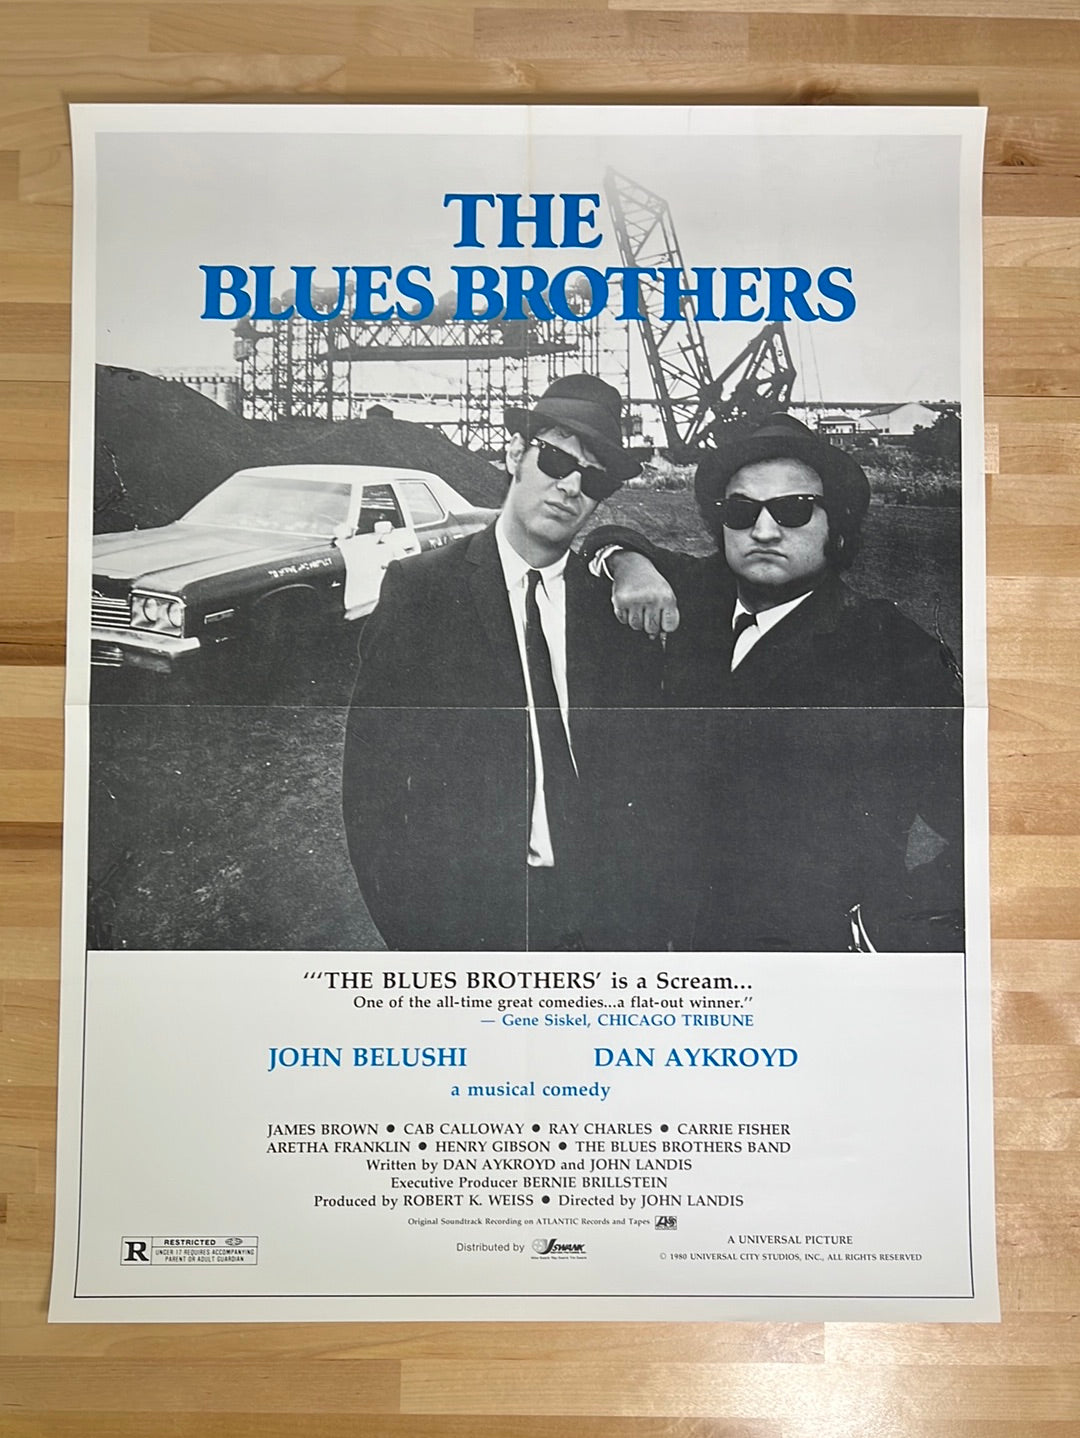 Blues Brothers - The Blues Brothers Original Motion Picture